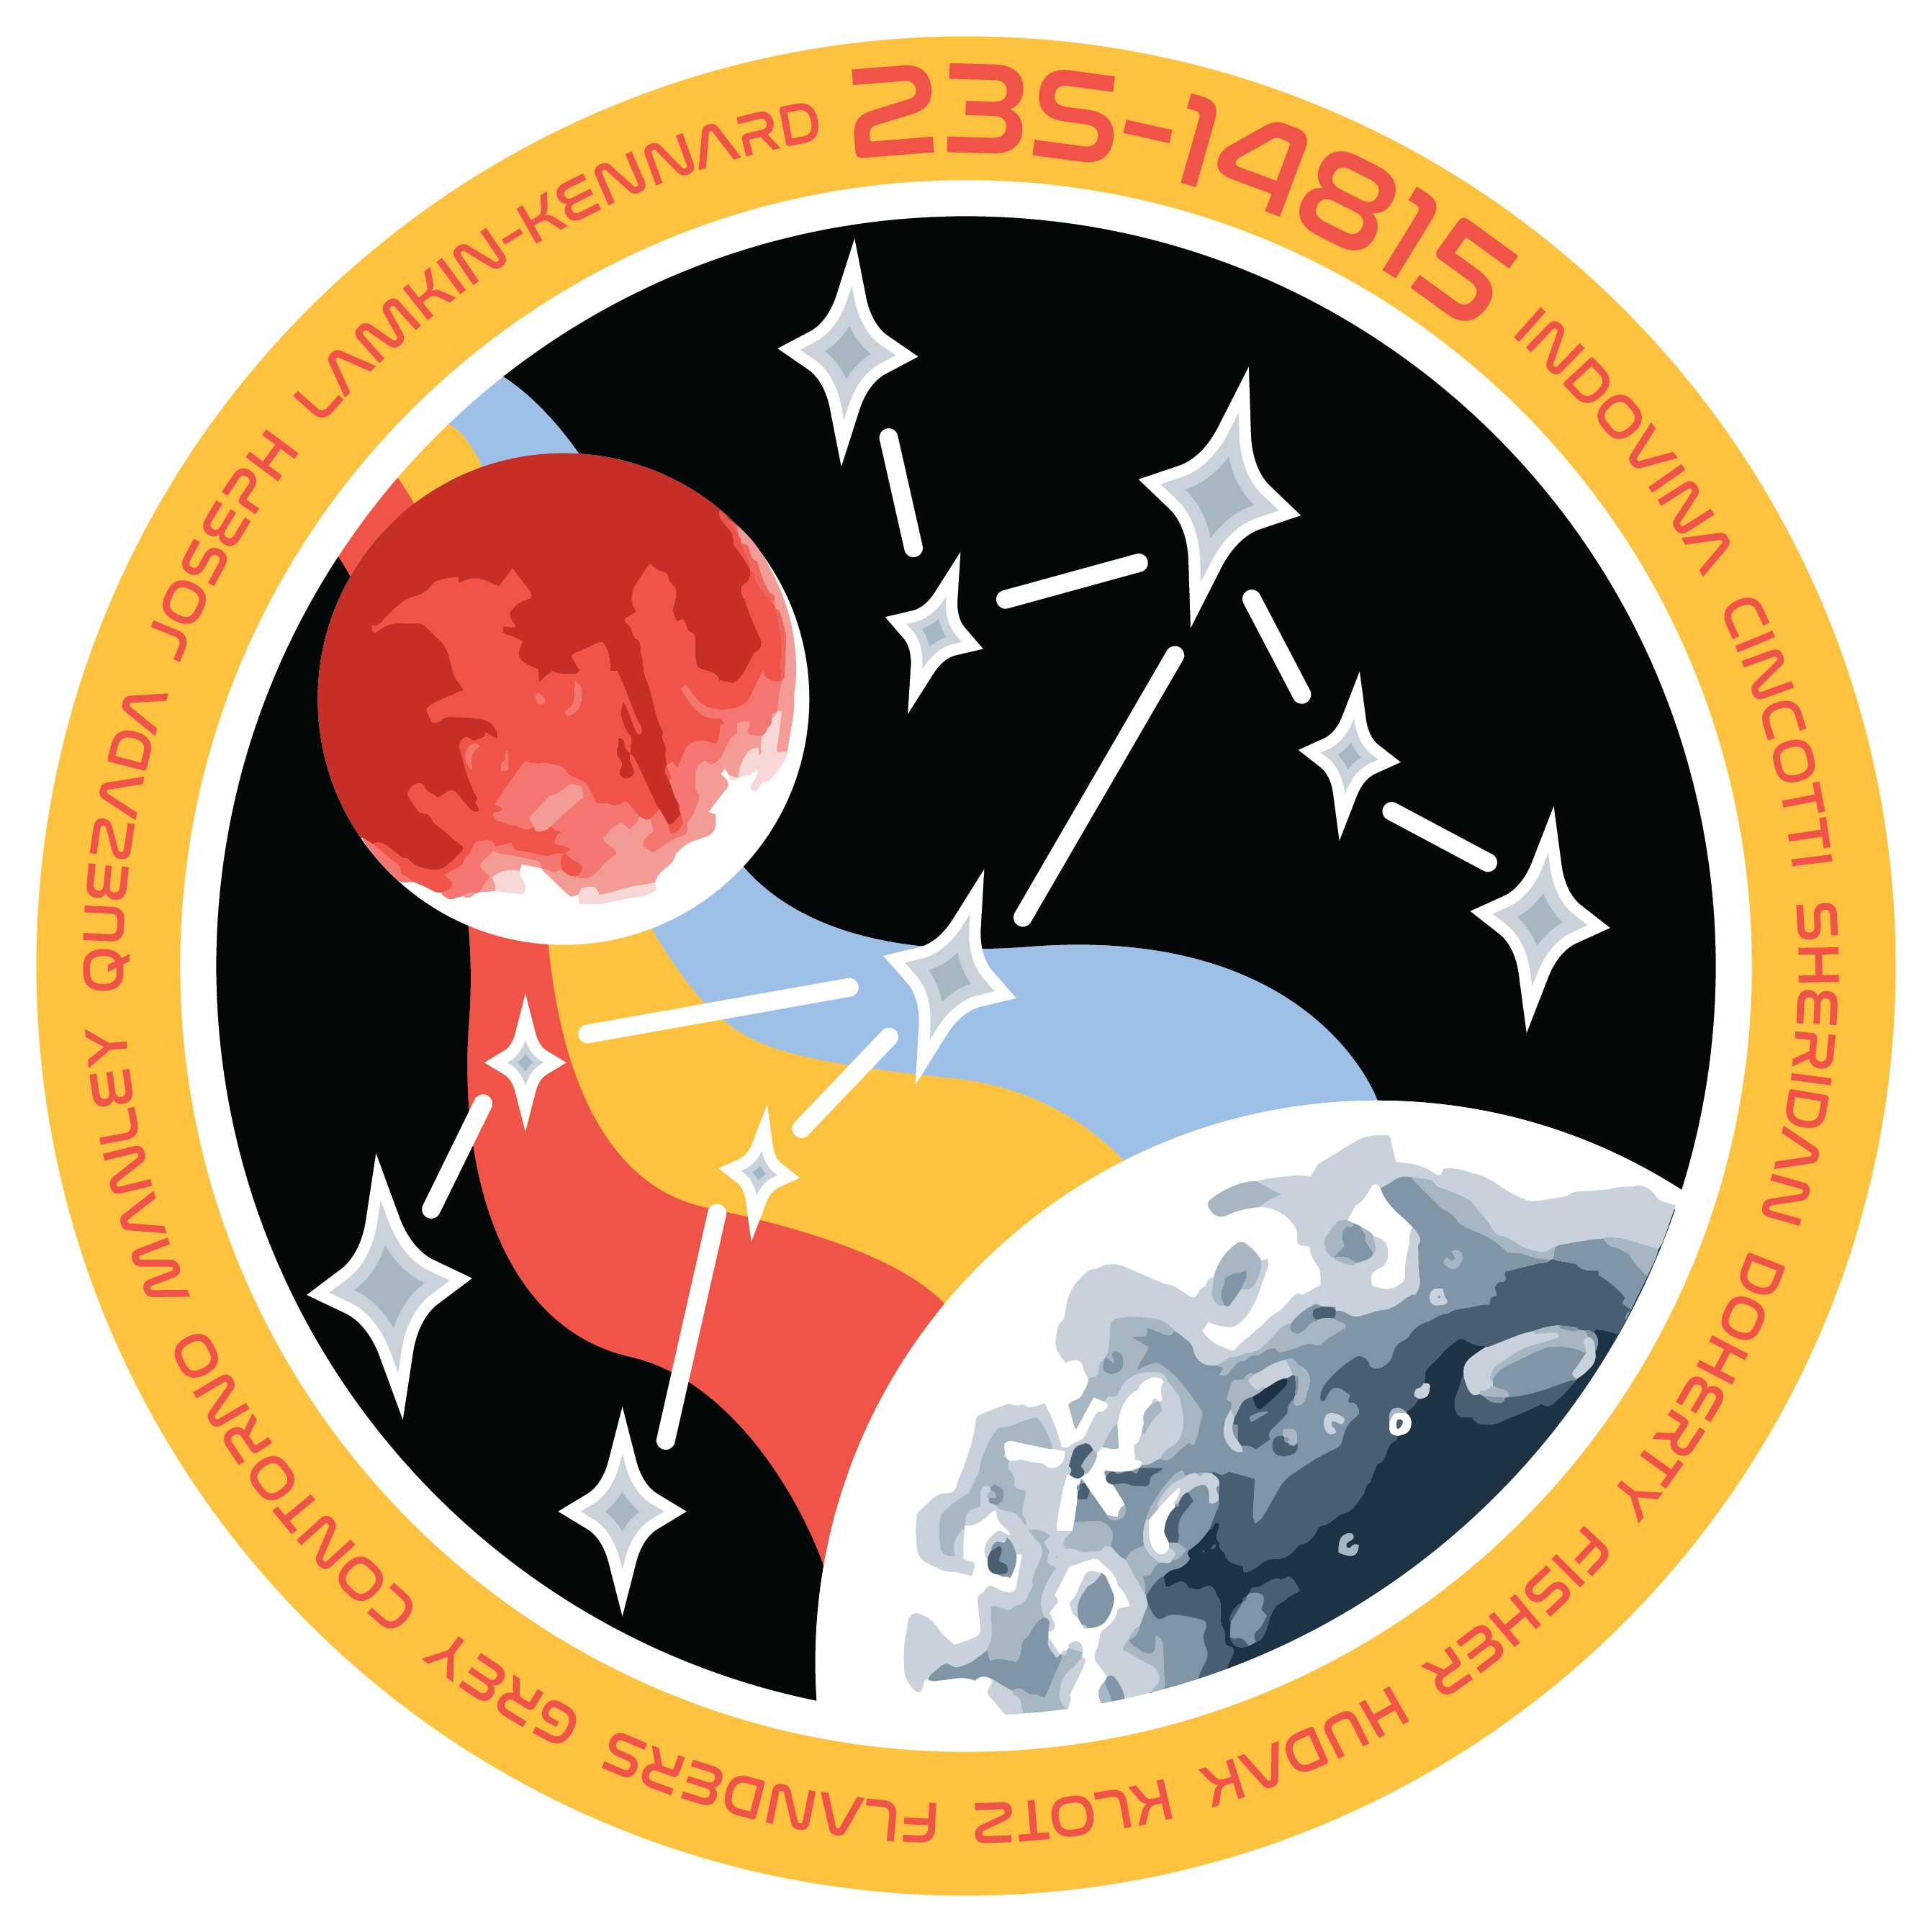 A NASA mission patch designed by Paige Manley.